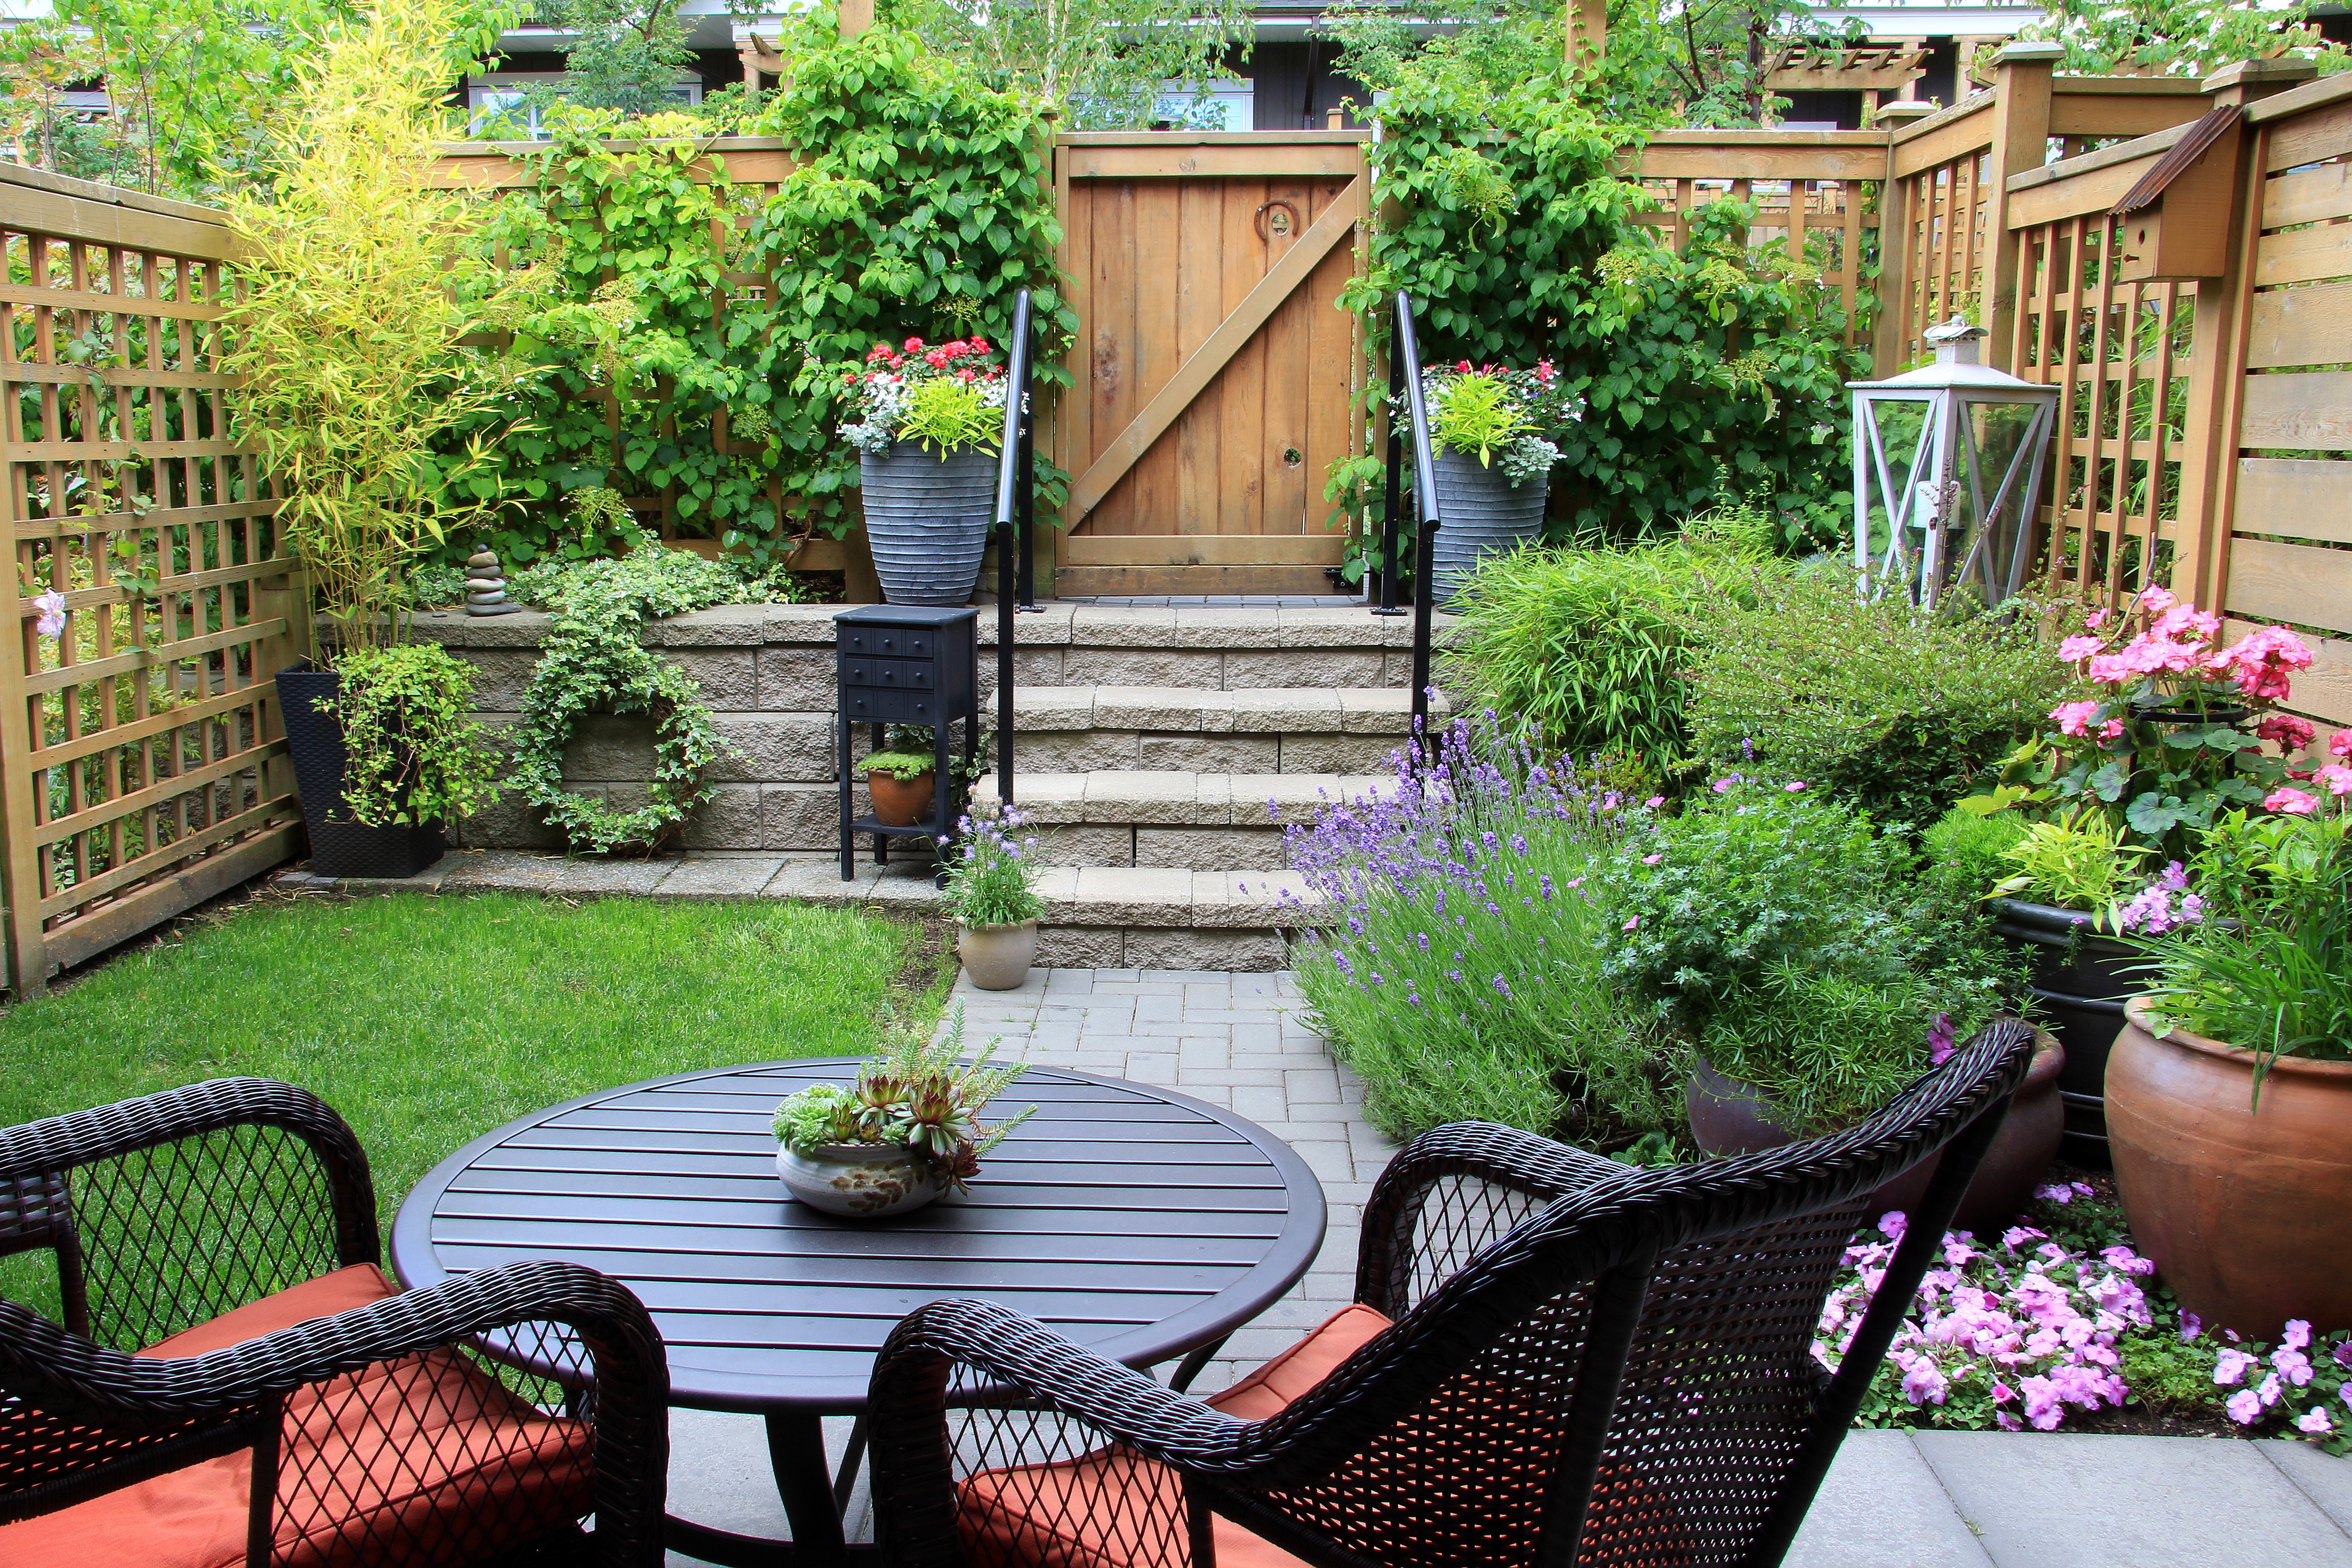 Small townhome garden with patio furniture amidst blooming lavender.